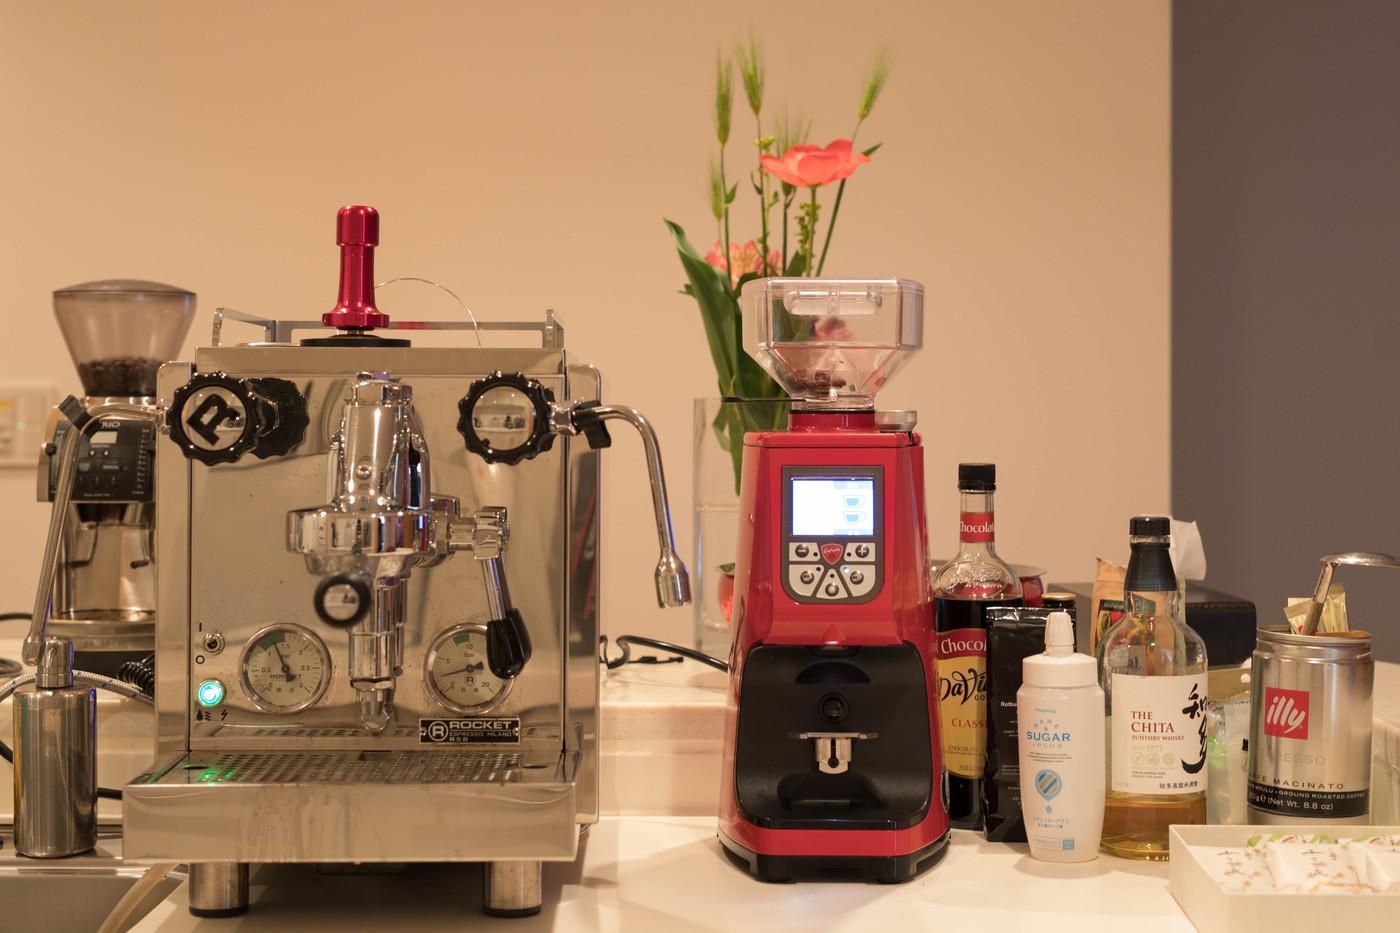 The espresso machine and grinders